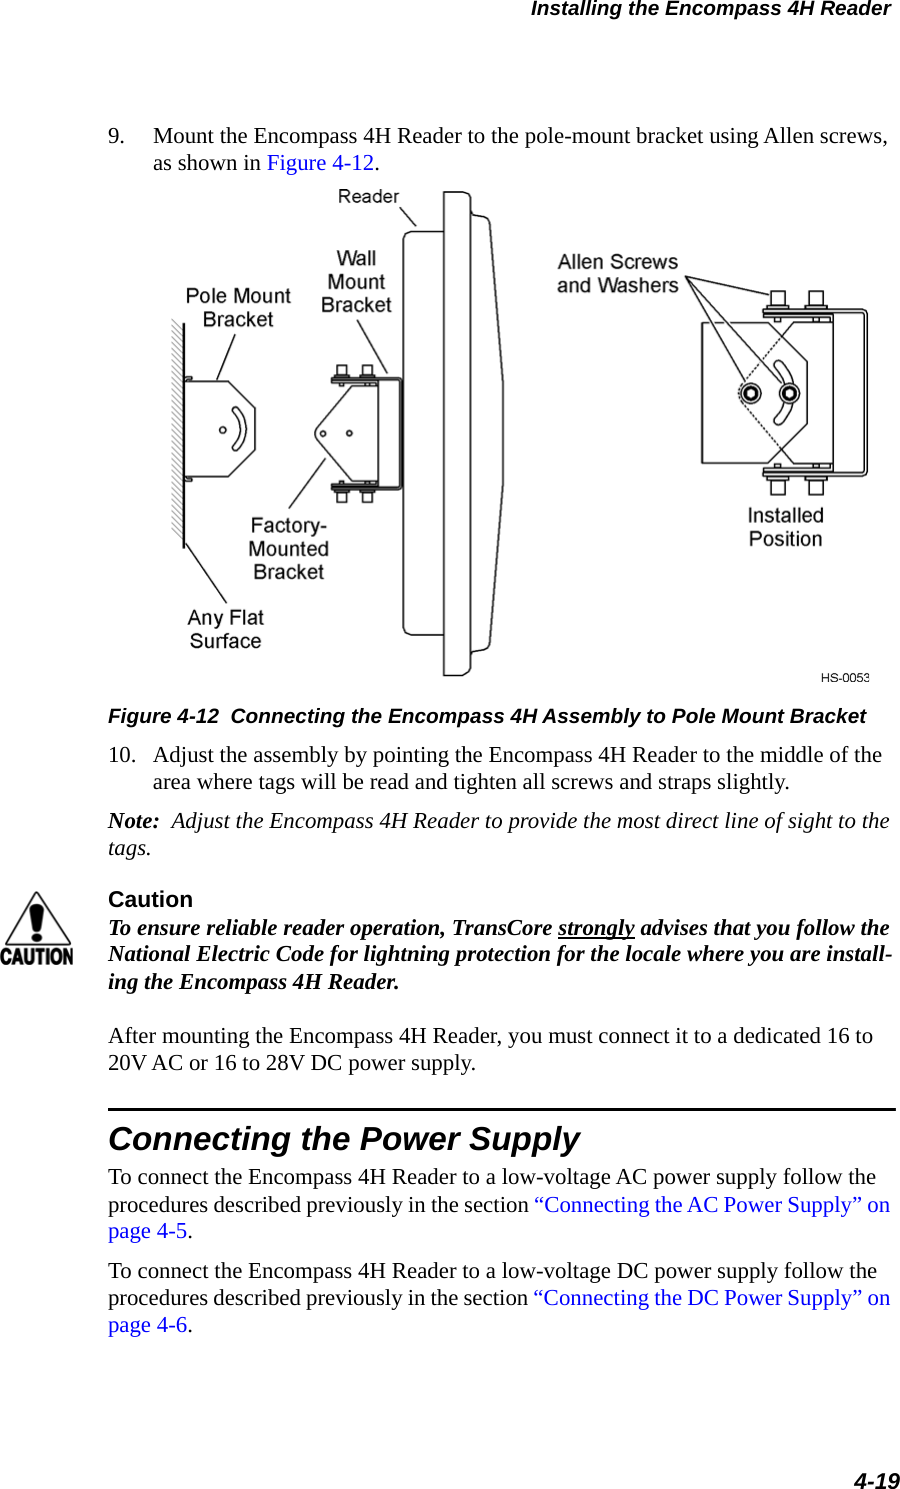 Installing the Encompass 4H Reader4-199. Mount the Encompass 4H Reader to the pole-mount bracket using Allen screws, as shown in Figure 4-12. Figure 4-12  Connecting the Encompass 4H Assembly to Pole Mount Bracket10. Adjust the assembly by pointing the Encompass 4H Reader to the middle of the area where tags will be read and tighten all screws and straps slightly.Note:  Adjust the Encompass 4H Reader to provide the most direct line of sight to the tags.CautionTo ensure reliable reader operation, TransCore strongly advises that you follow the National Electric Code for lightning protection for the locale where you are install-ing the Encompass 4H Reader.After mounting the Encompass 4H Reader, you must connect it to a dedicated 16 to 20V AC or 16 to 28V DC power supply.Connecting the Power SupplyTo connect the Encompass 4H Reader to a low-voltage AC power supply follow the procedures described previously in the section “Connecting the AC Power Supply” on page 4-5.To connect the Encompass 4H Reader to a low-voltage DC power supply follow the procedures described previously in the section “Connecting the DC Power Supply” on page 4-6.